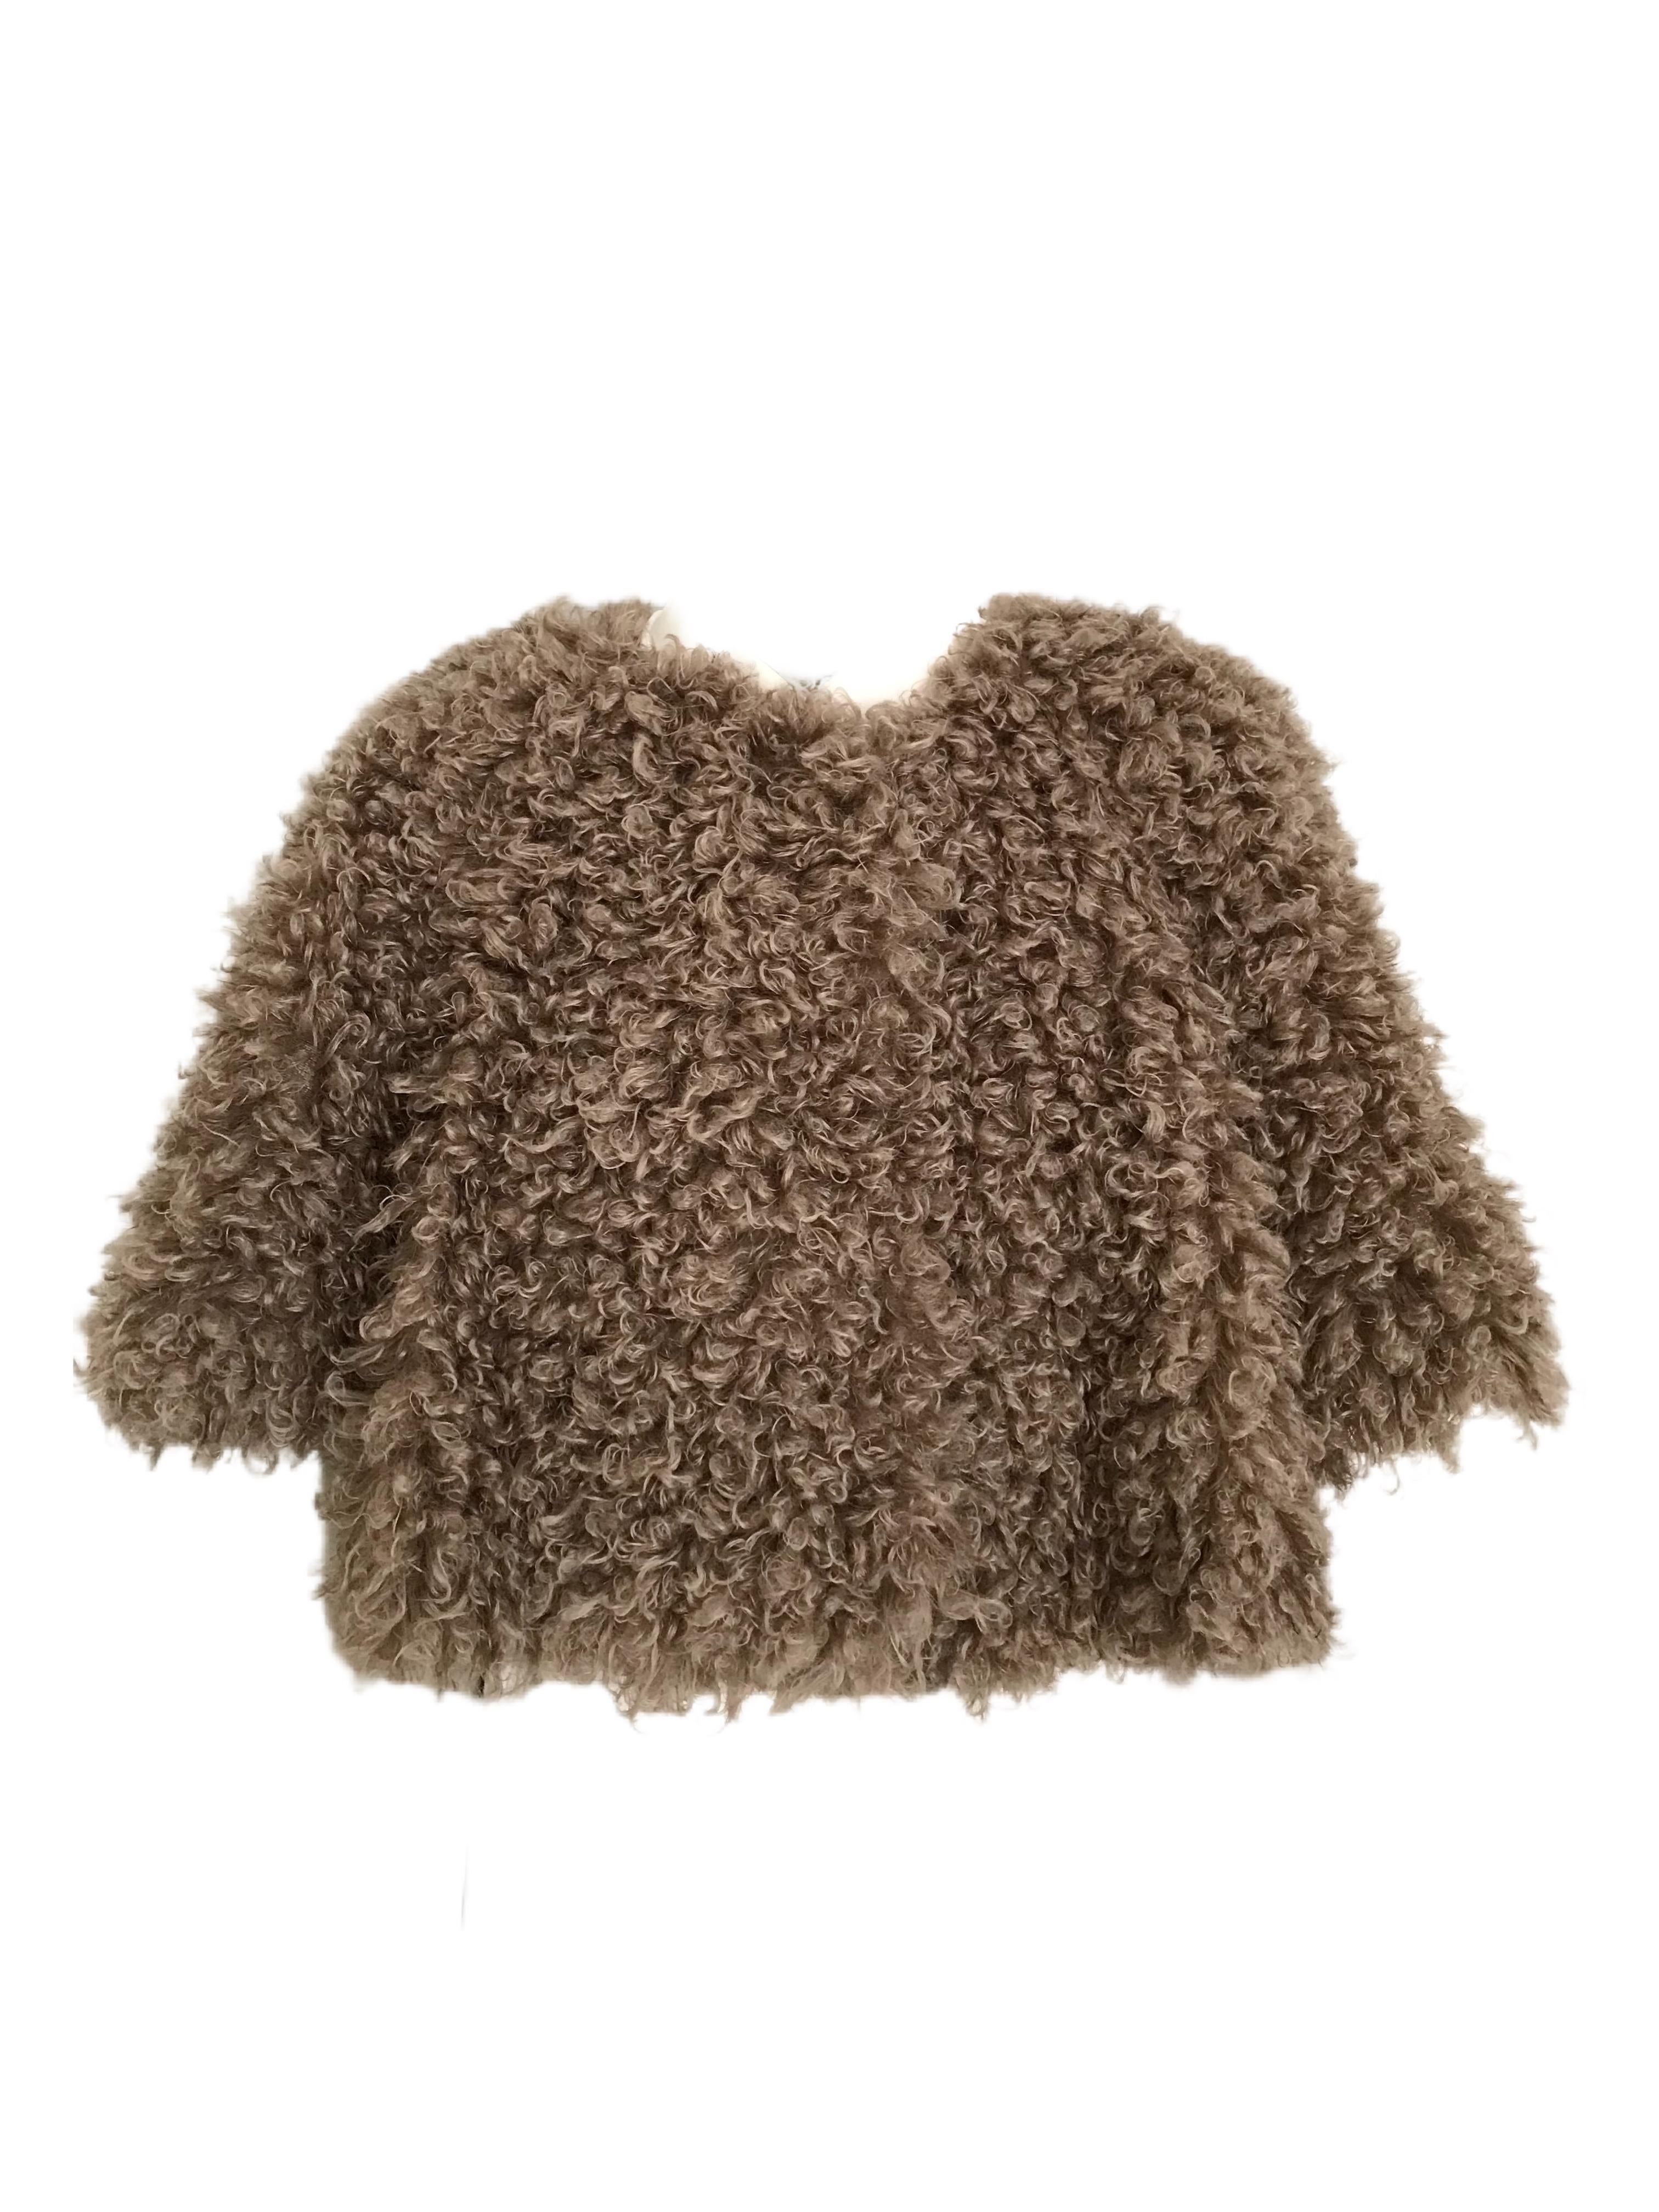 The Pelush faux fur curly reversible jacket is a one of a kind exclusive piece. Two jackets in one. Featuring a rich Italian silk charmeuse abstract print on one side, and a soft curly boucle' faux fur in a soft mushroom color on the opposite side.